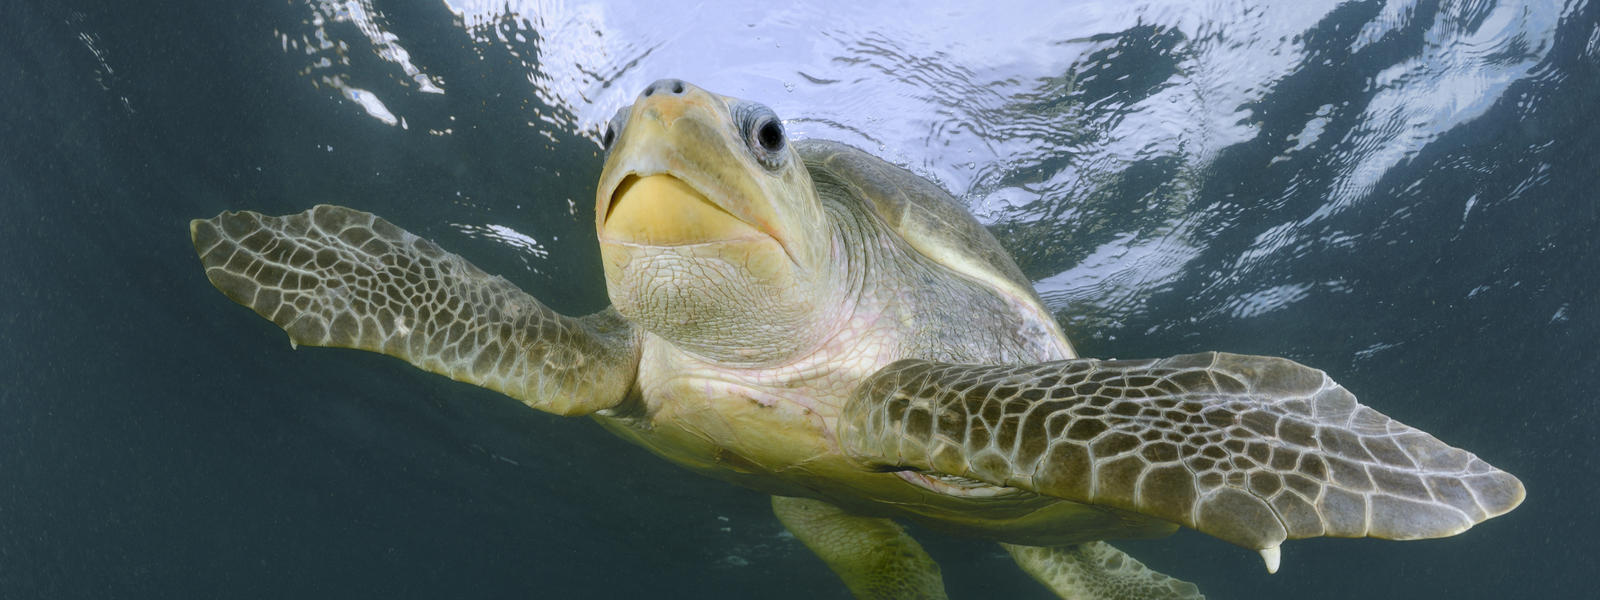 A rare Olive Ridley turtle